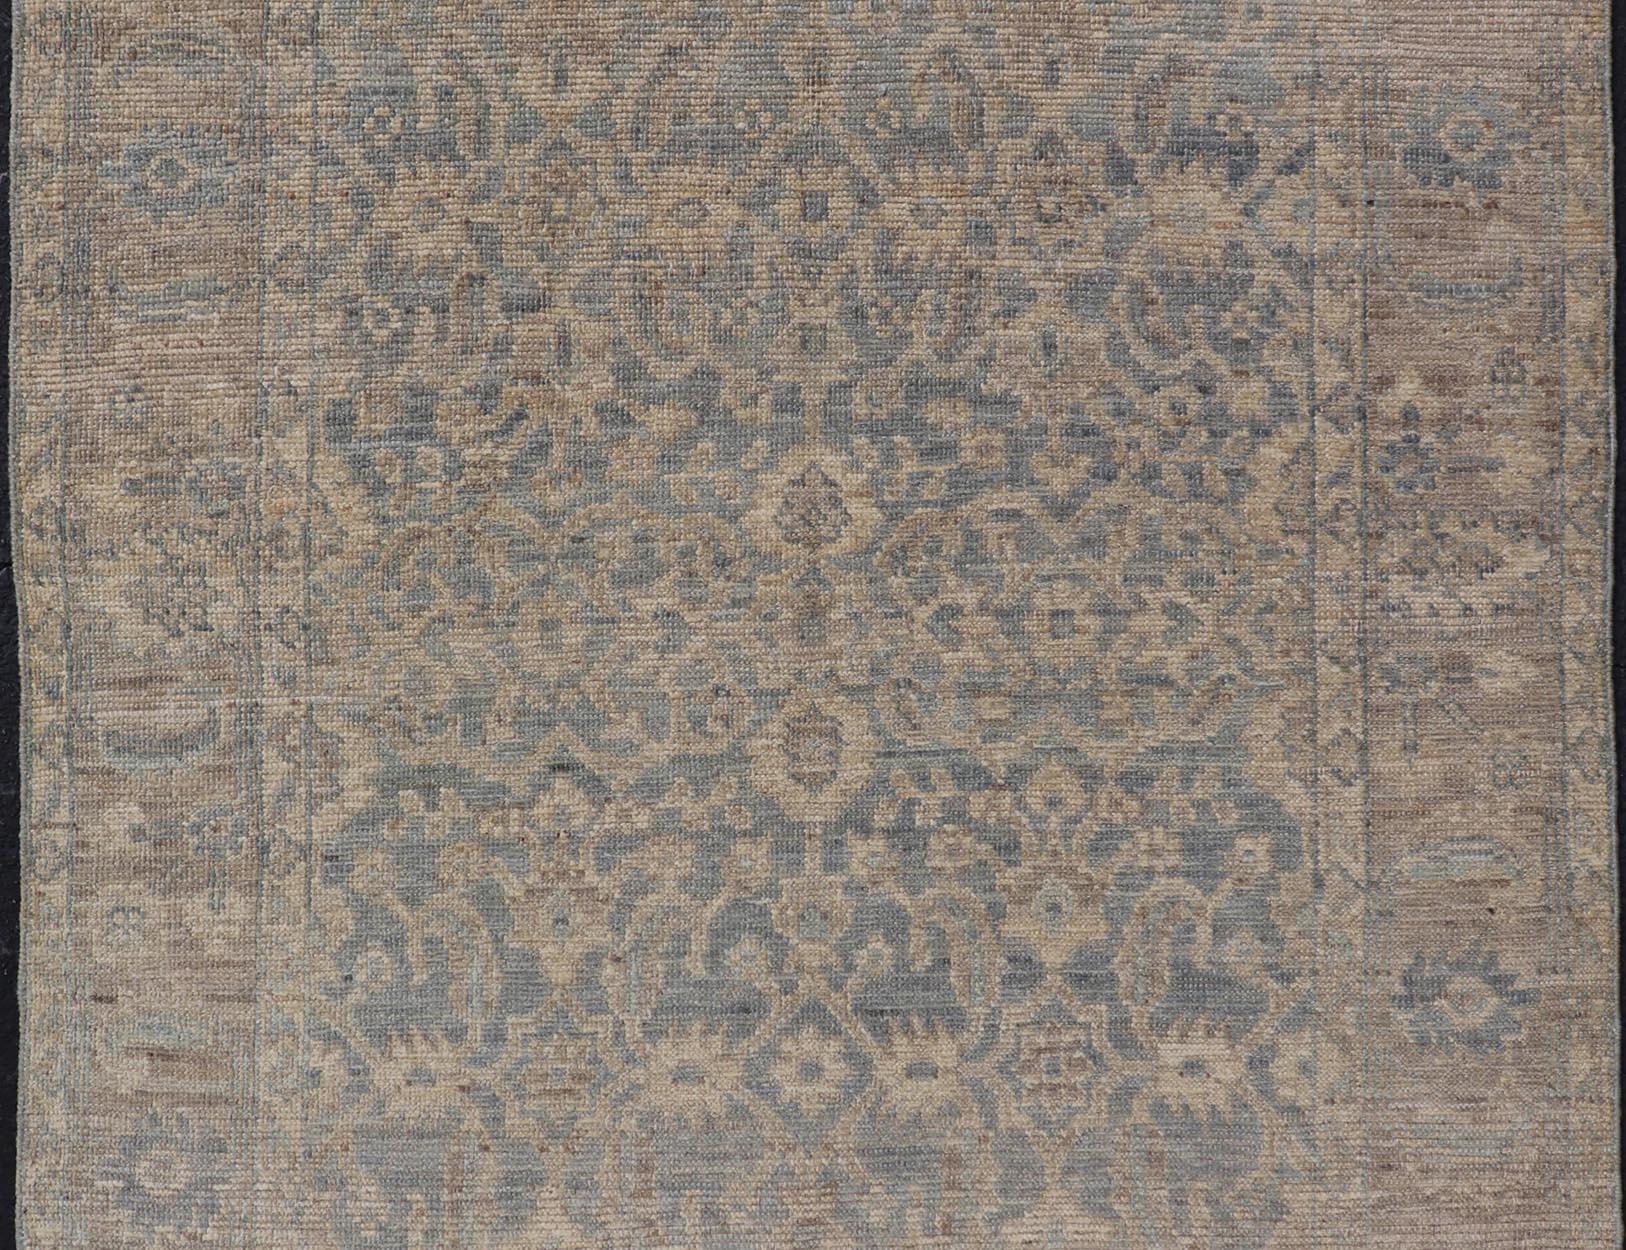 Hand-Knotted Modern Oushak Rug in All-Over Floral Motifs